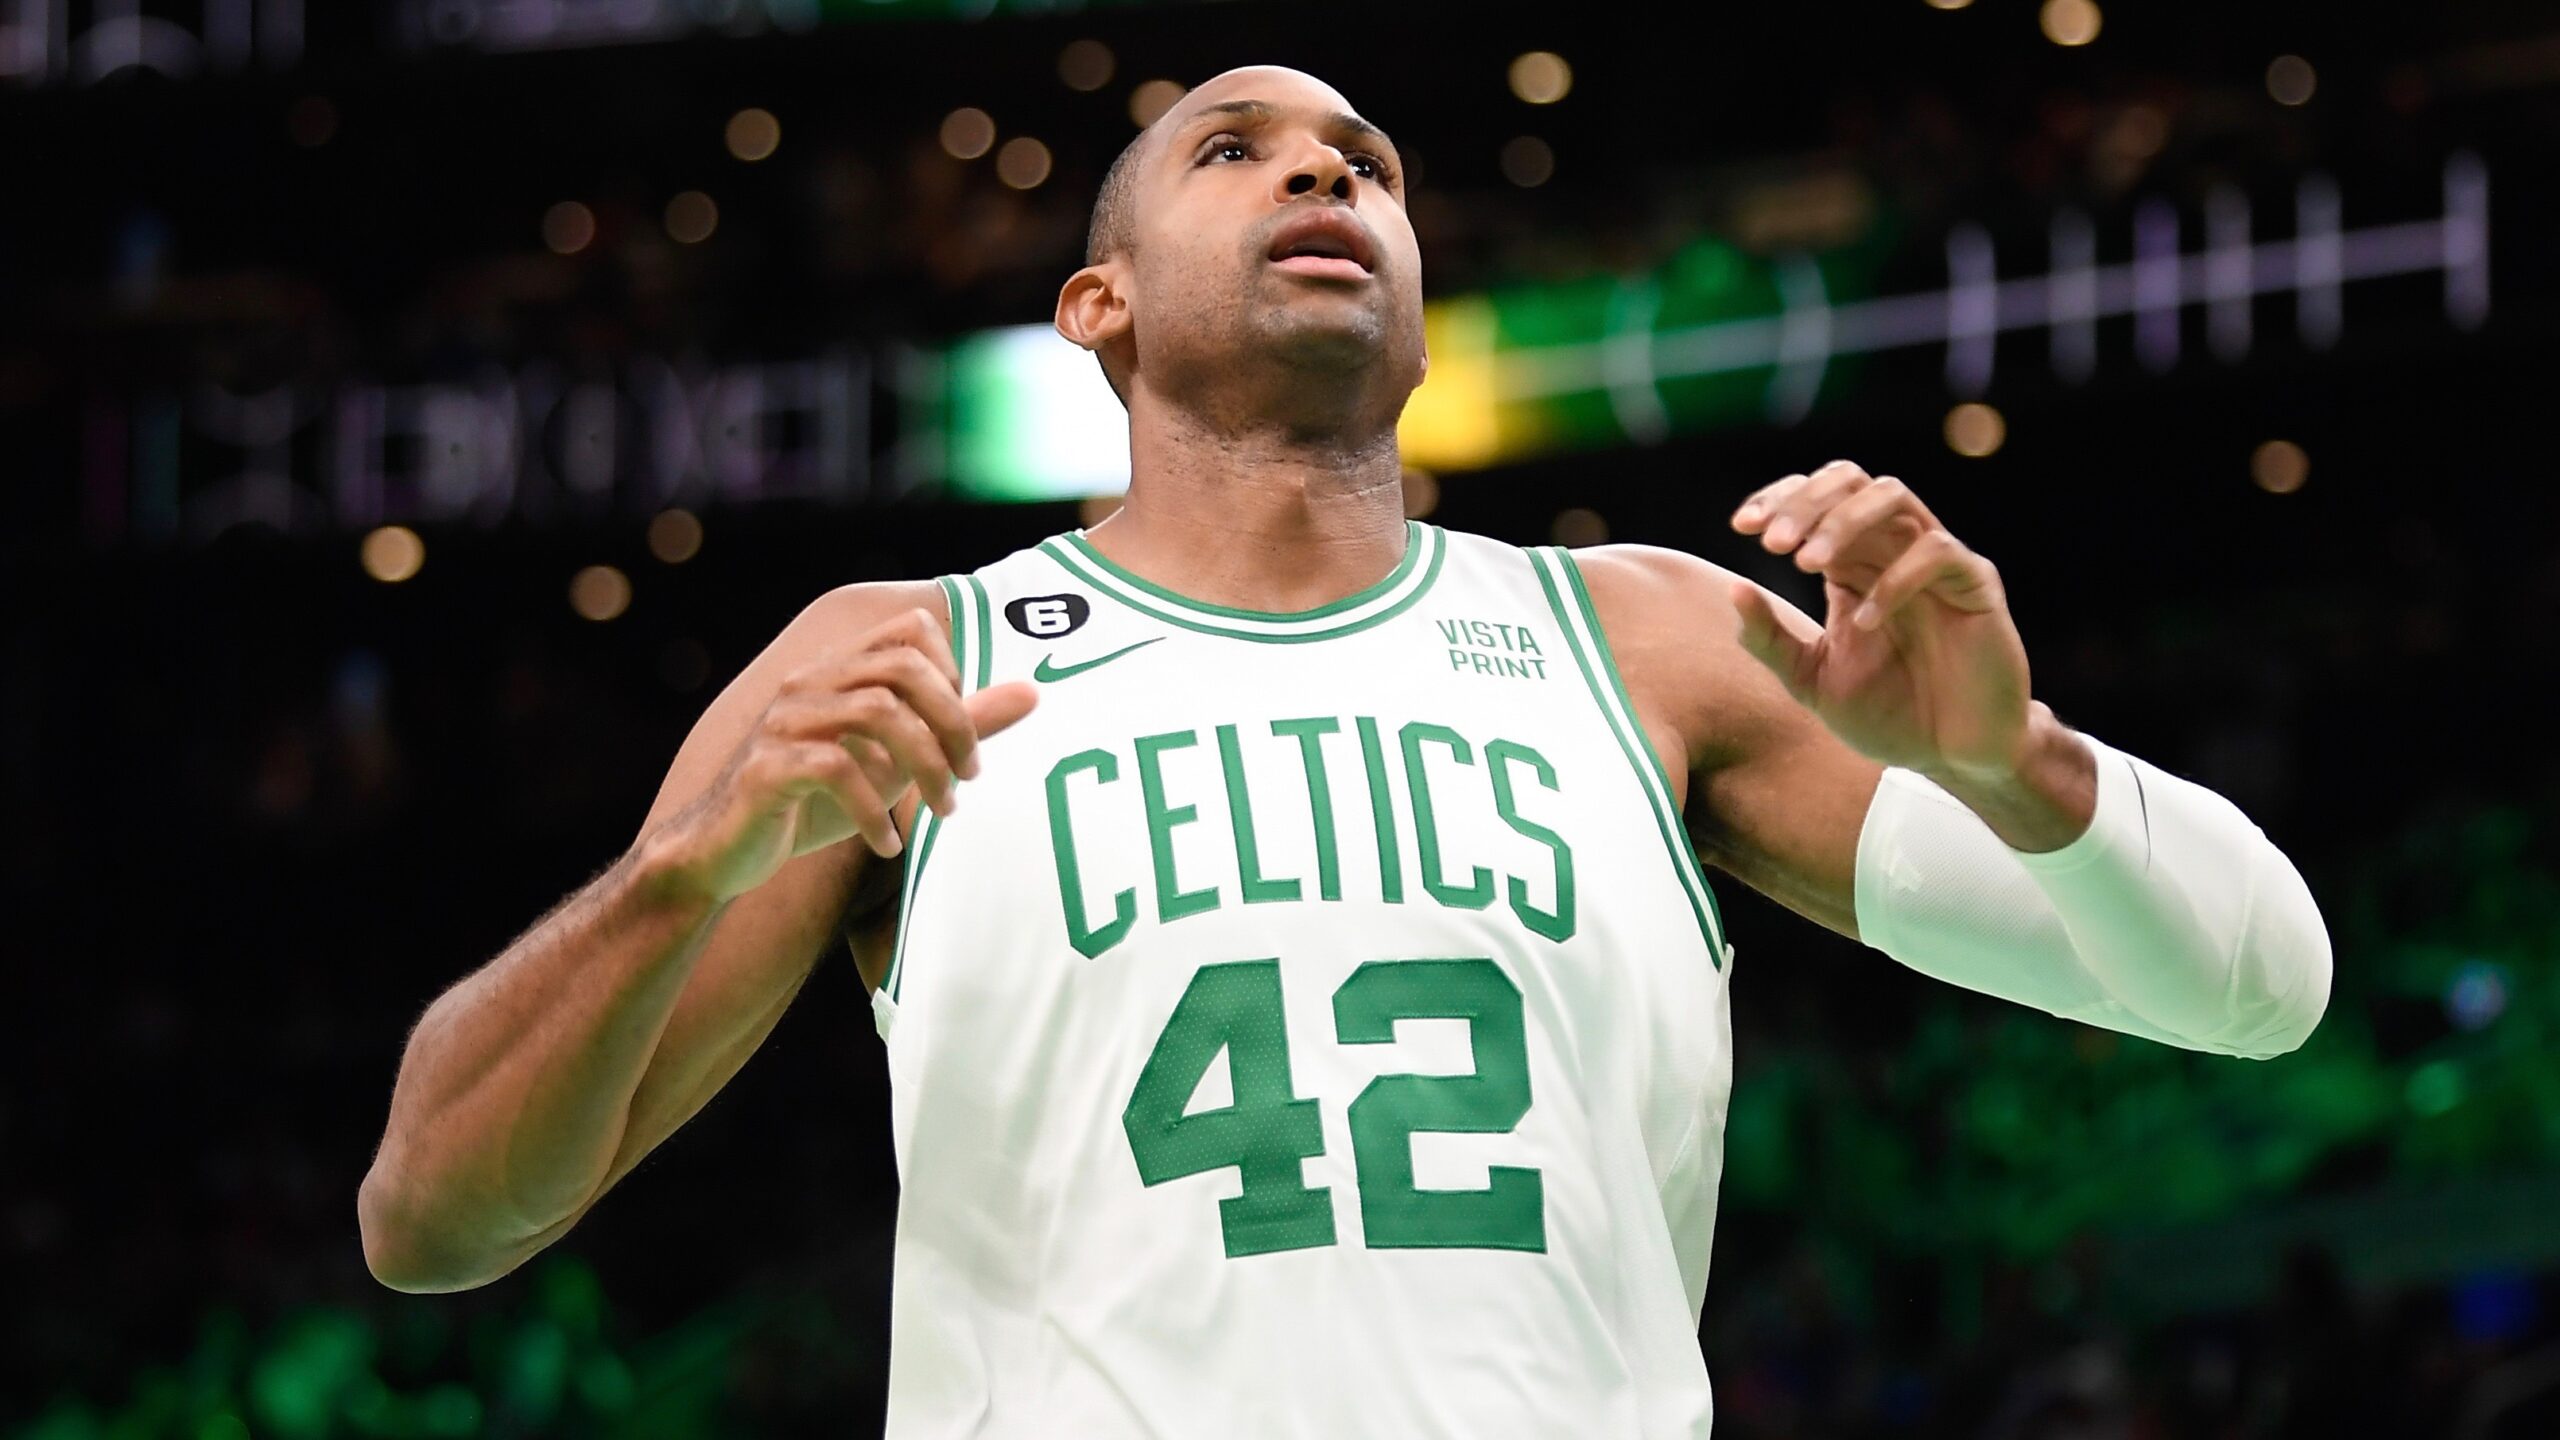 Celtics and Al Horford Agree to 2-Year, $20 Million Extension